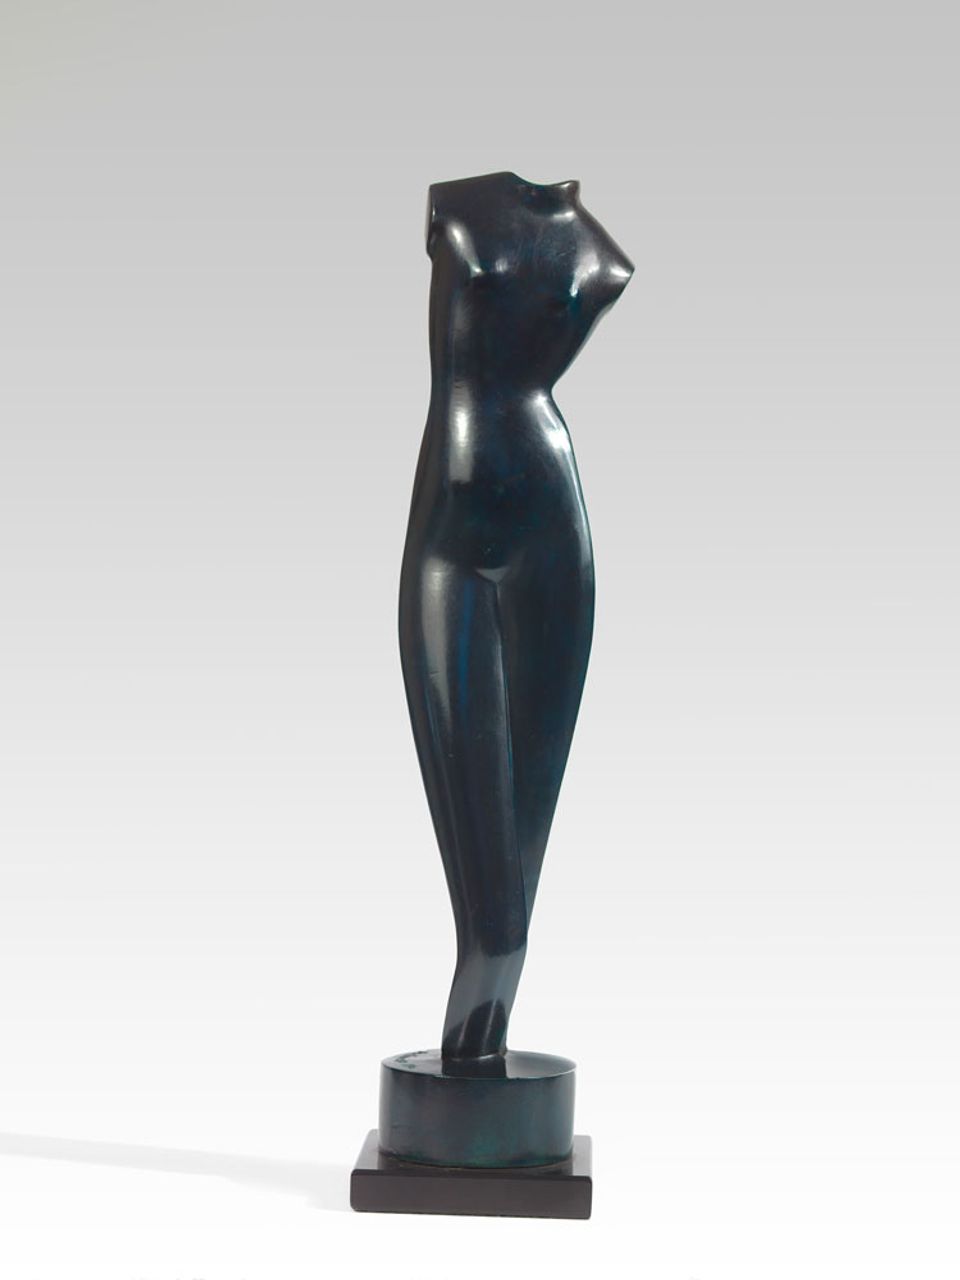 A bronze sculpture of a female figure without a head.